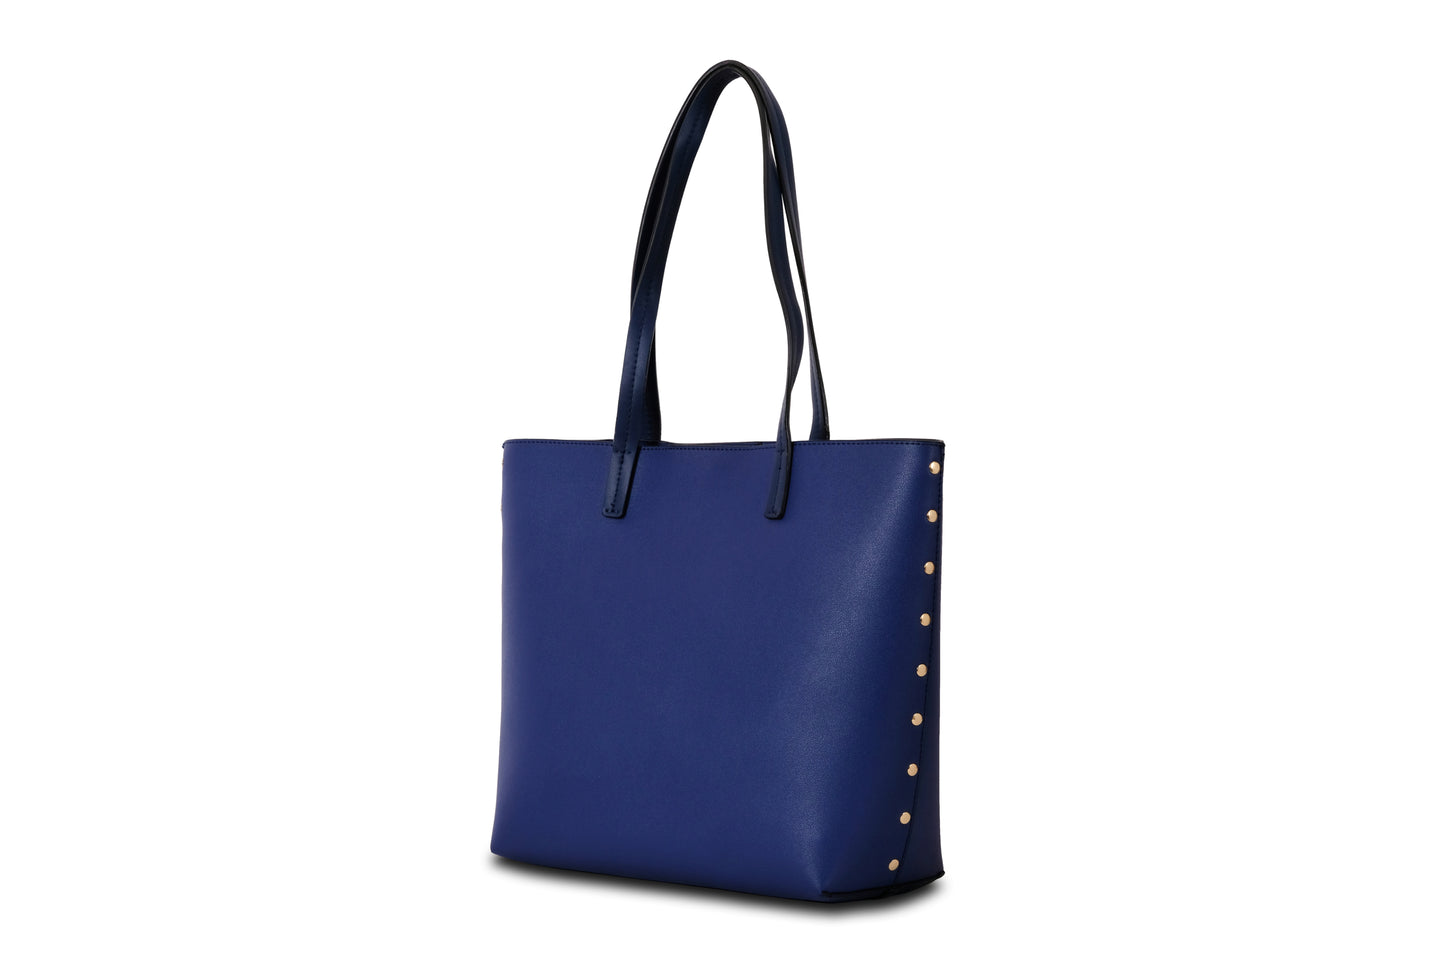 Rowi Pebble Grain Faux Leather Twilight Blue Tote Bag Handbag made by Dewi Maya side view available at the best boutique in Upstate South Carolina Spartanburg Greenville Dewi Maya Boutique